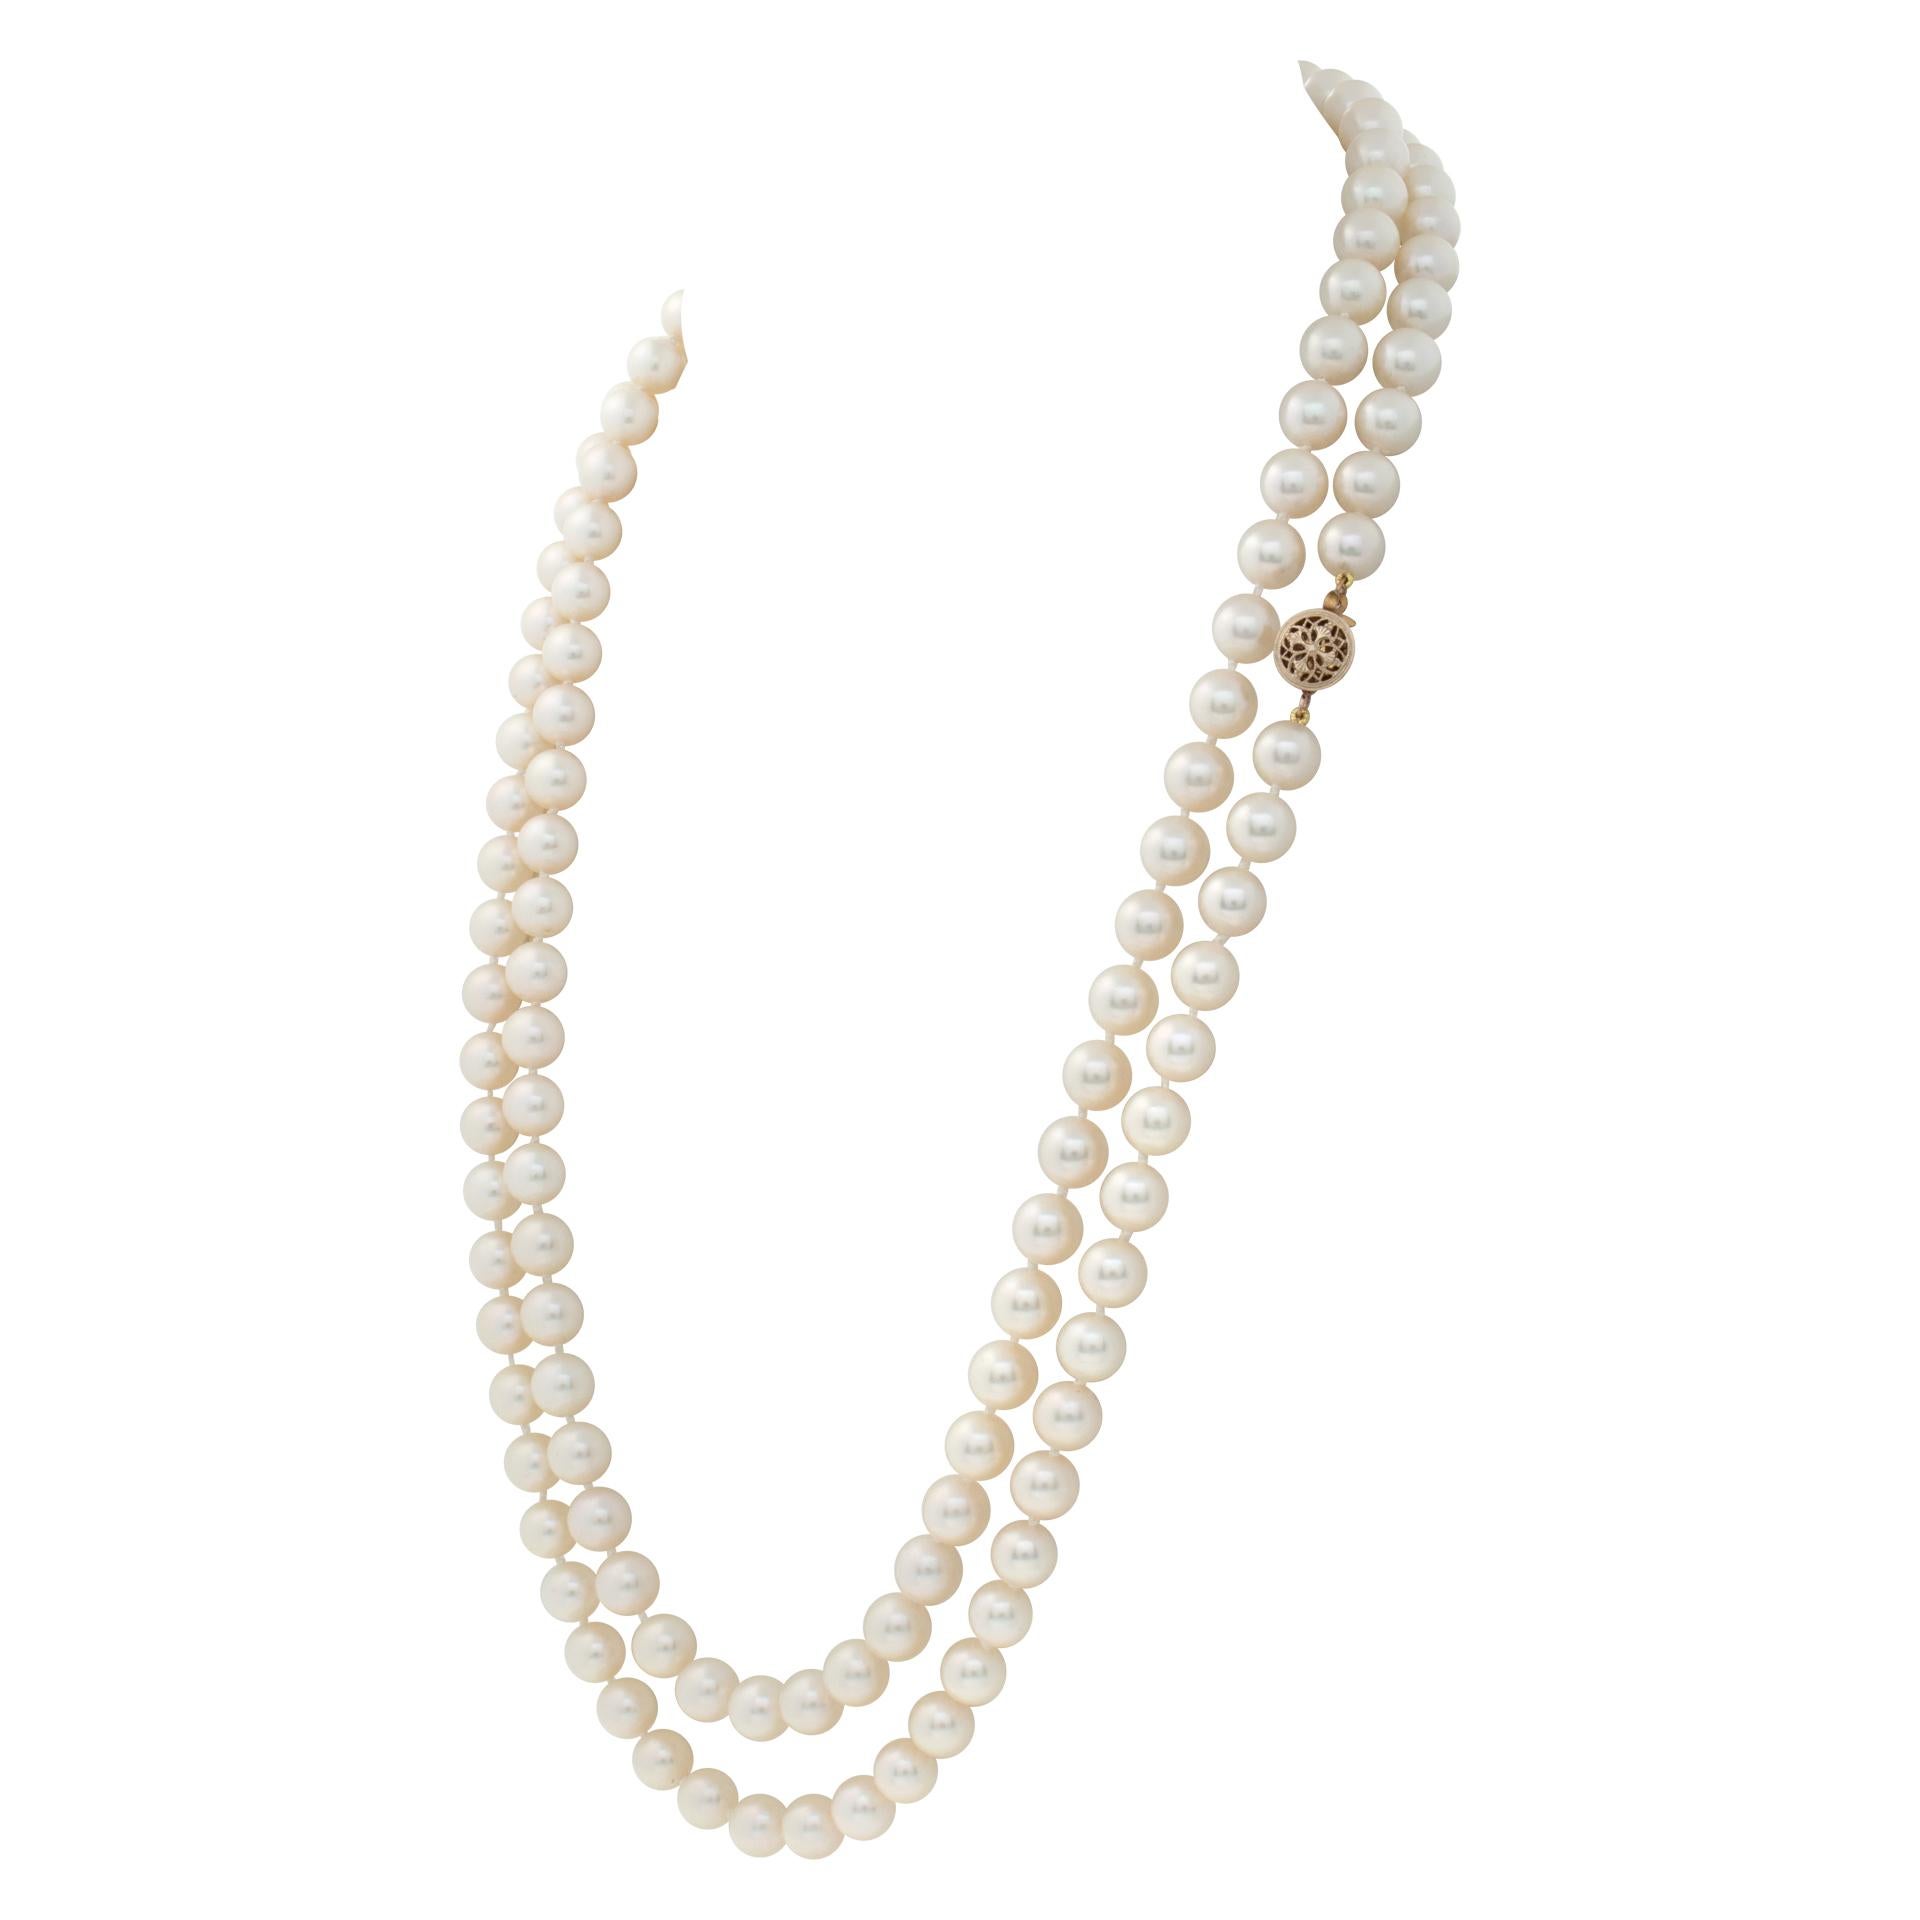 Opera Length Strand Of Akoya Pearl Necklace With A Yellow Gold Clasp In Excellent Condition For Sale In Surfside, FL